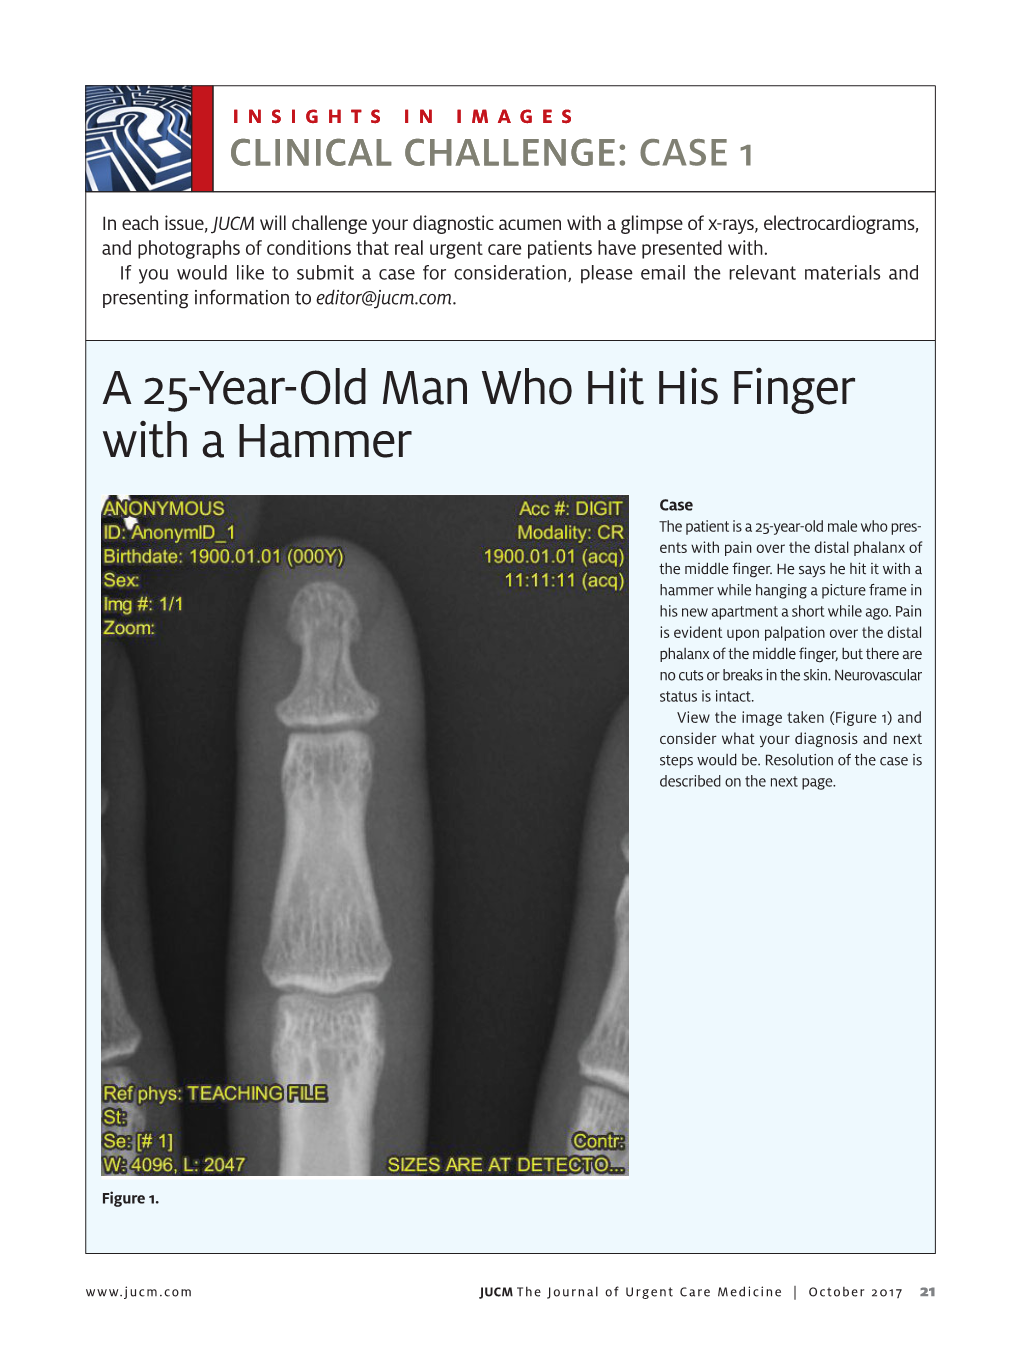 A 25-Year-Old Man Who Hit His Finger with a Hammer